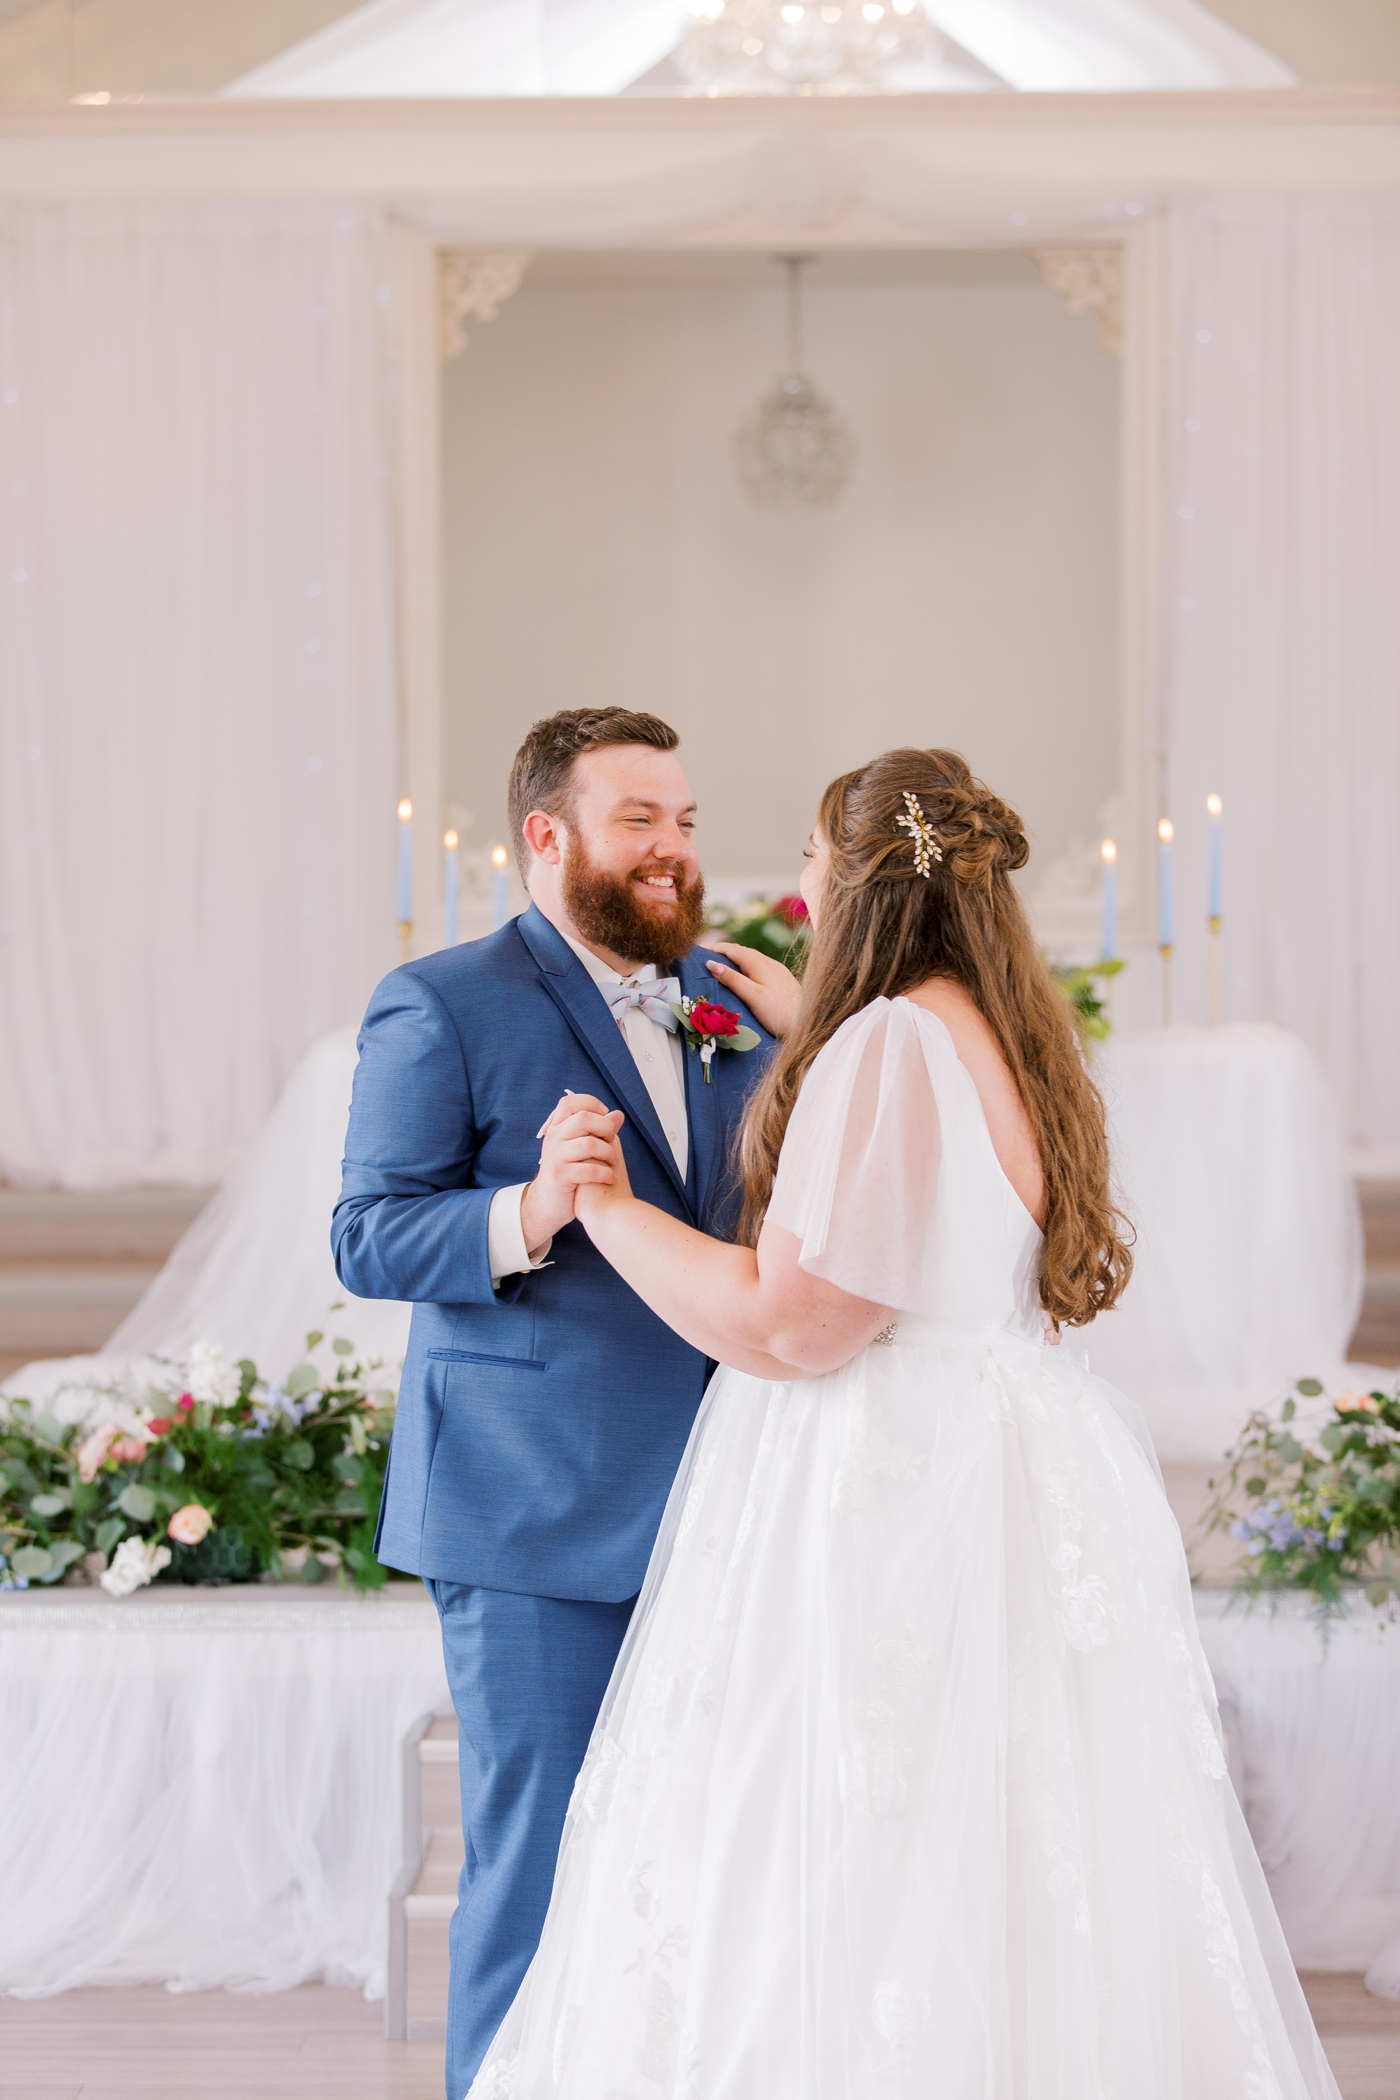 First dance at Crystalline Events